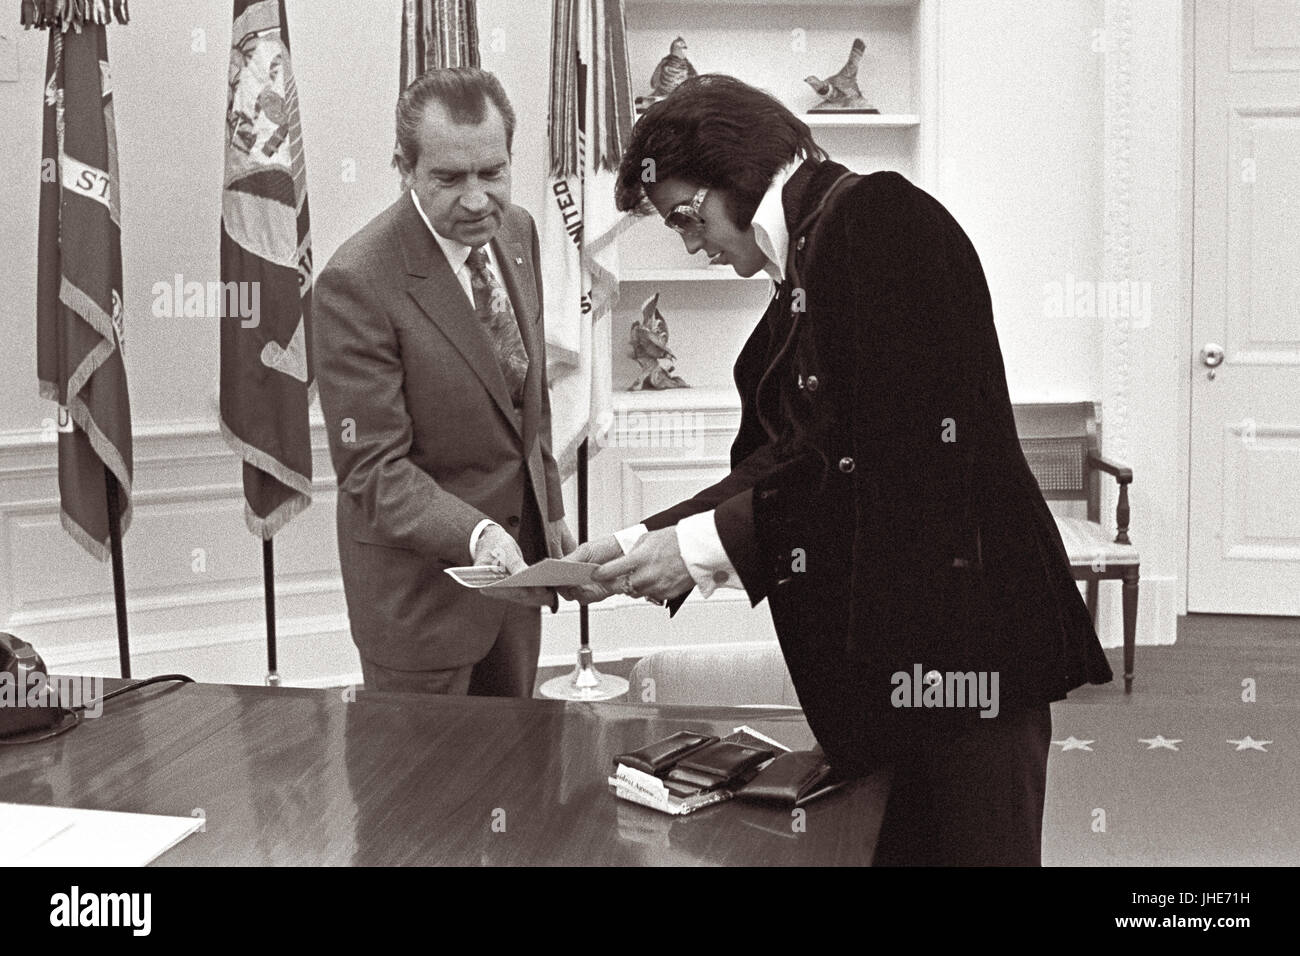 President Nixon meets with entertainer Elvis Presley in the Oval Office of the White House on December 21, 1970. (Photo by Oliver F. Atkins) Stock Photo